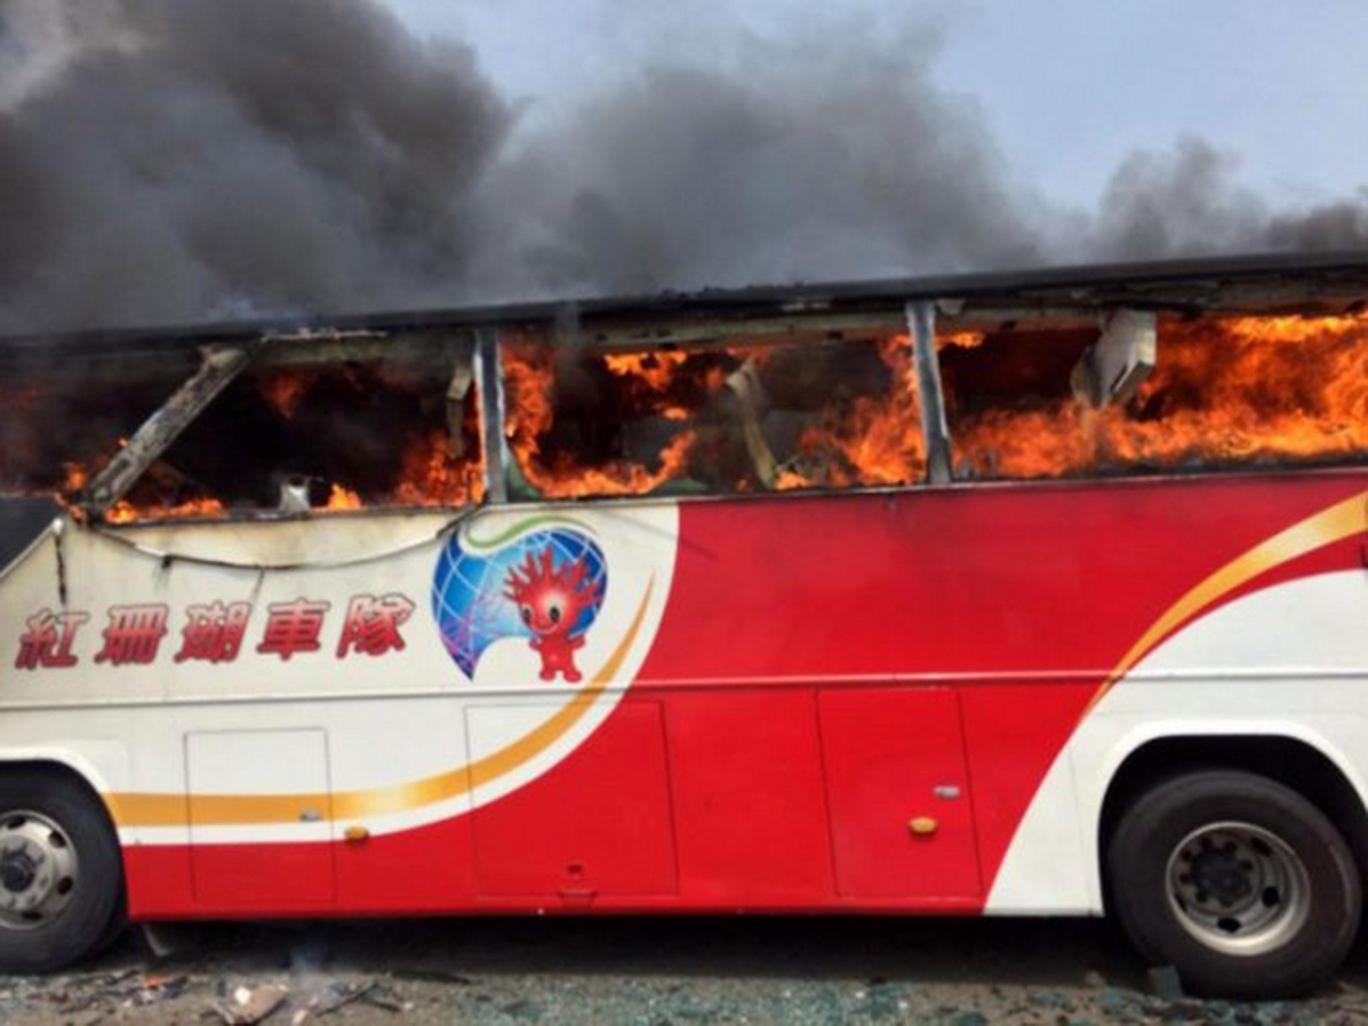 Taiwan bus bursts into flames, killing 26, including 24 tourists from China